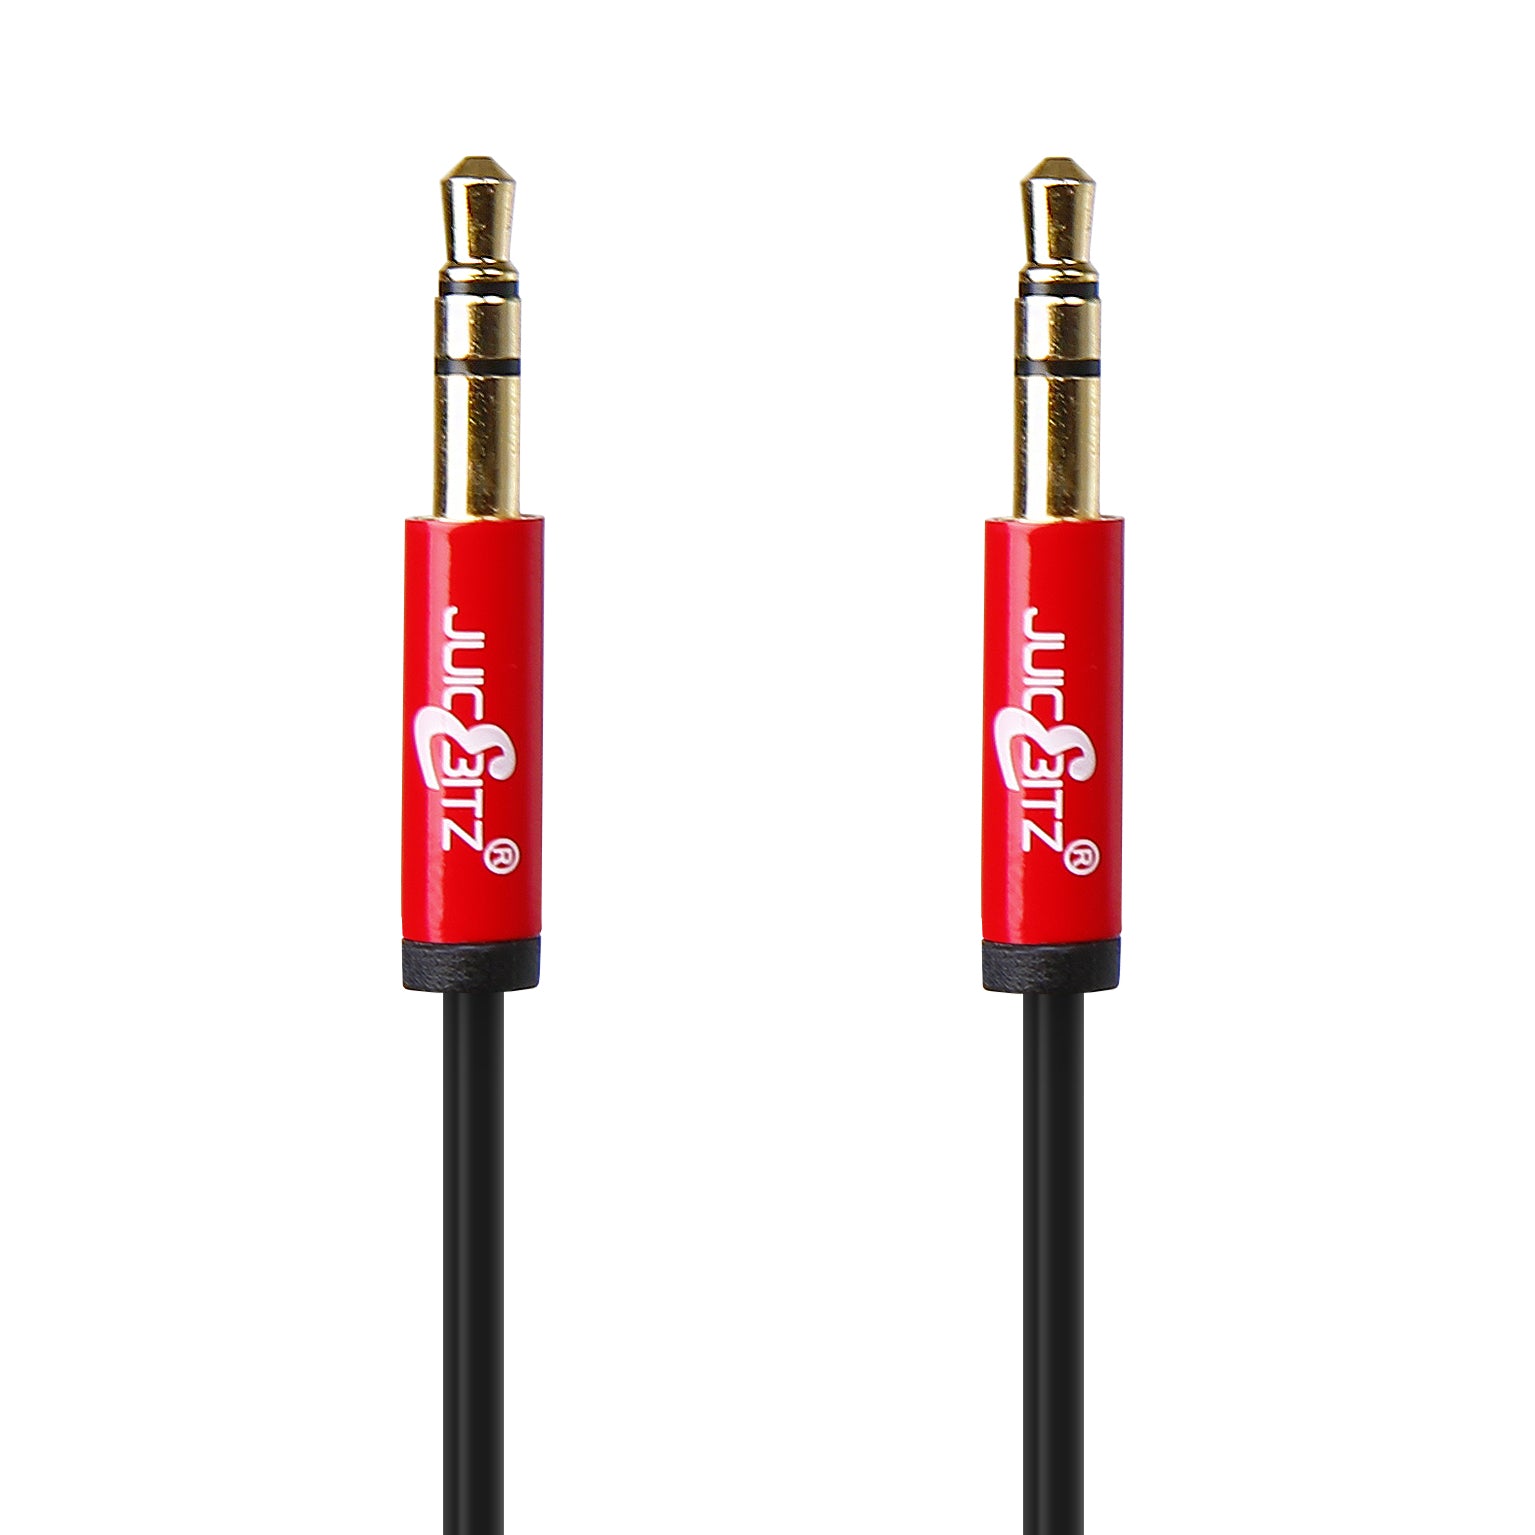 Audio cable with a 3.5mm male-male jack